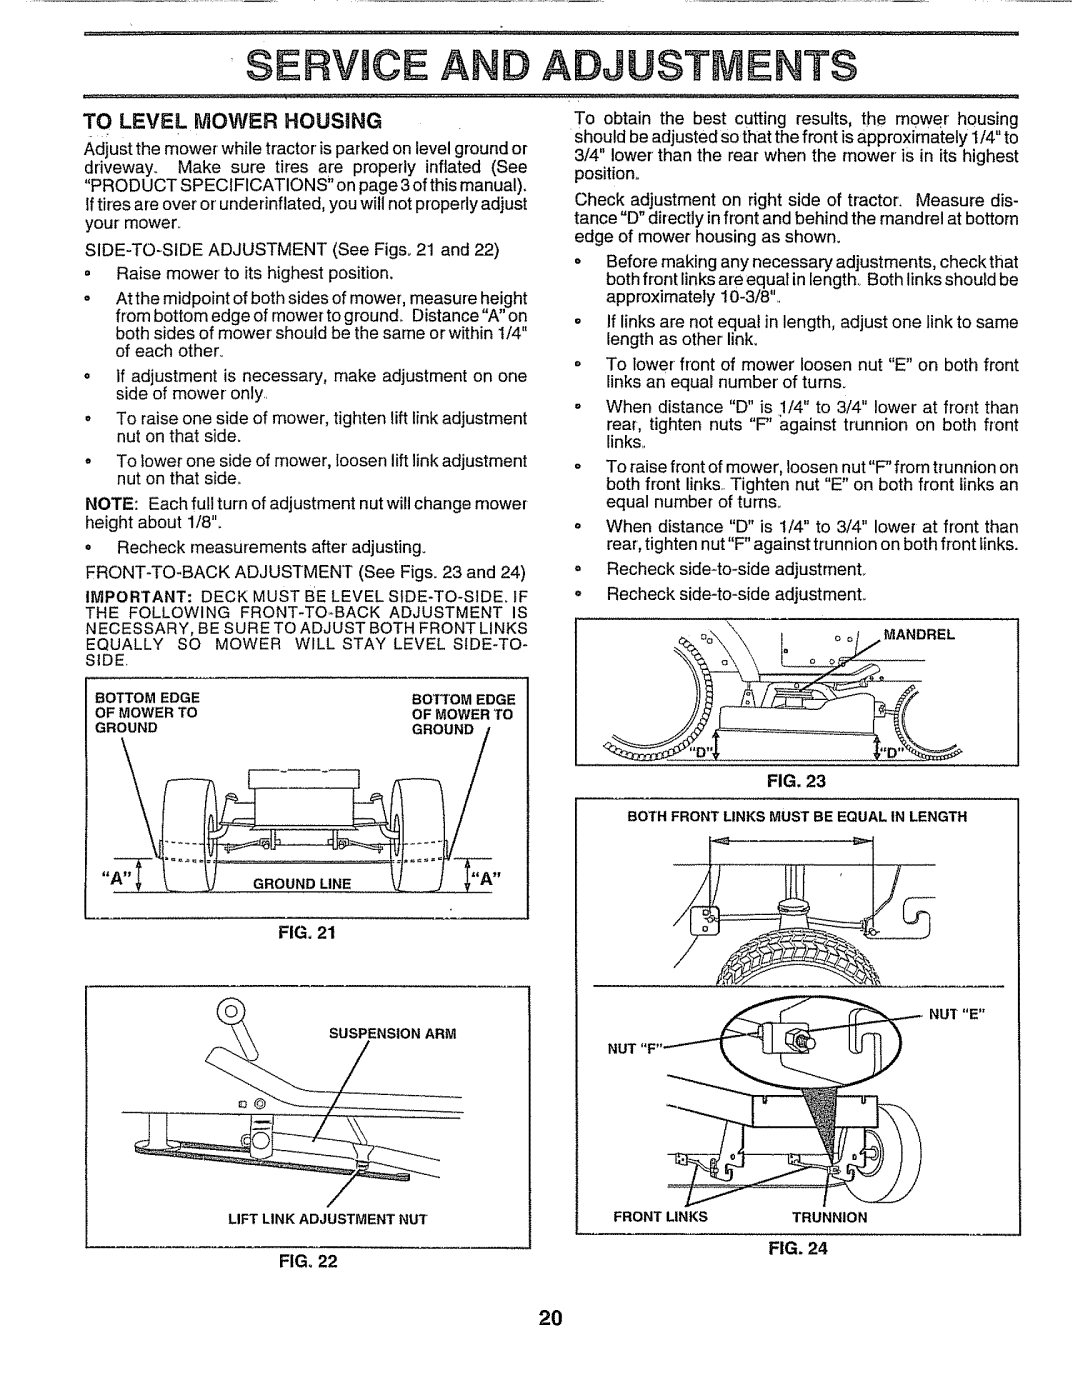 Sears 917.257552 manual Ervjce And Adjustments, To Level Mower Housing, Fig. Fig 